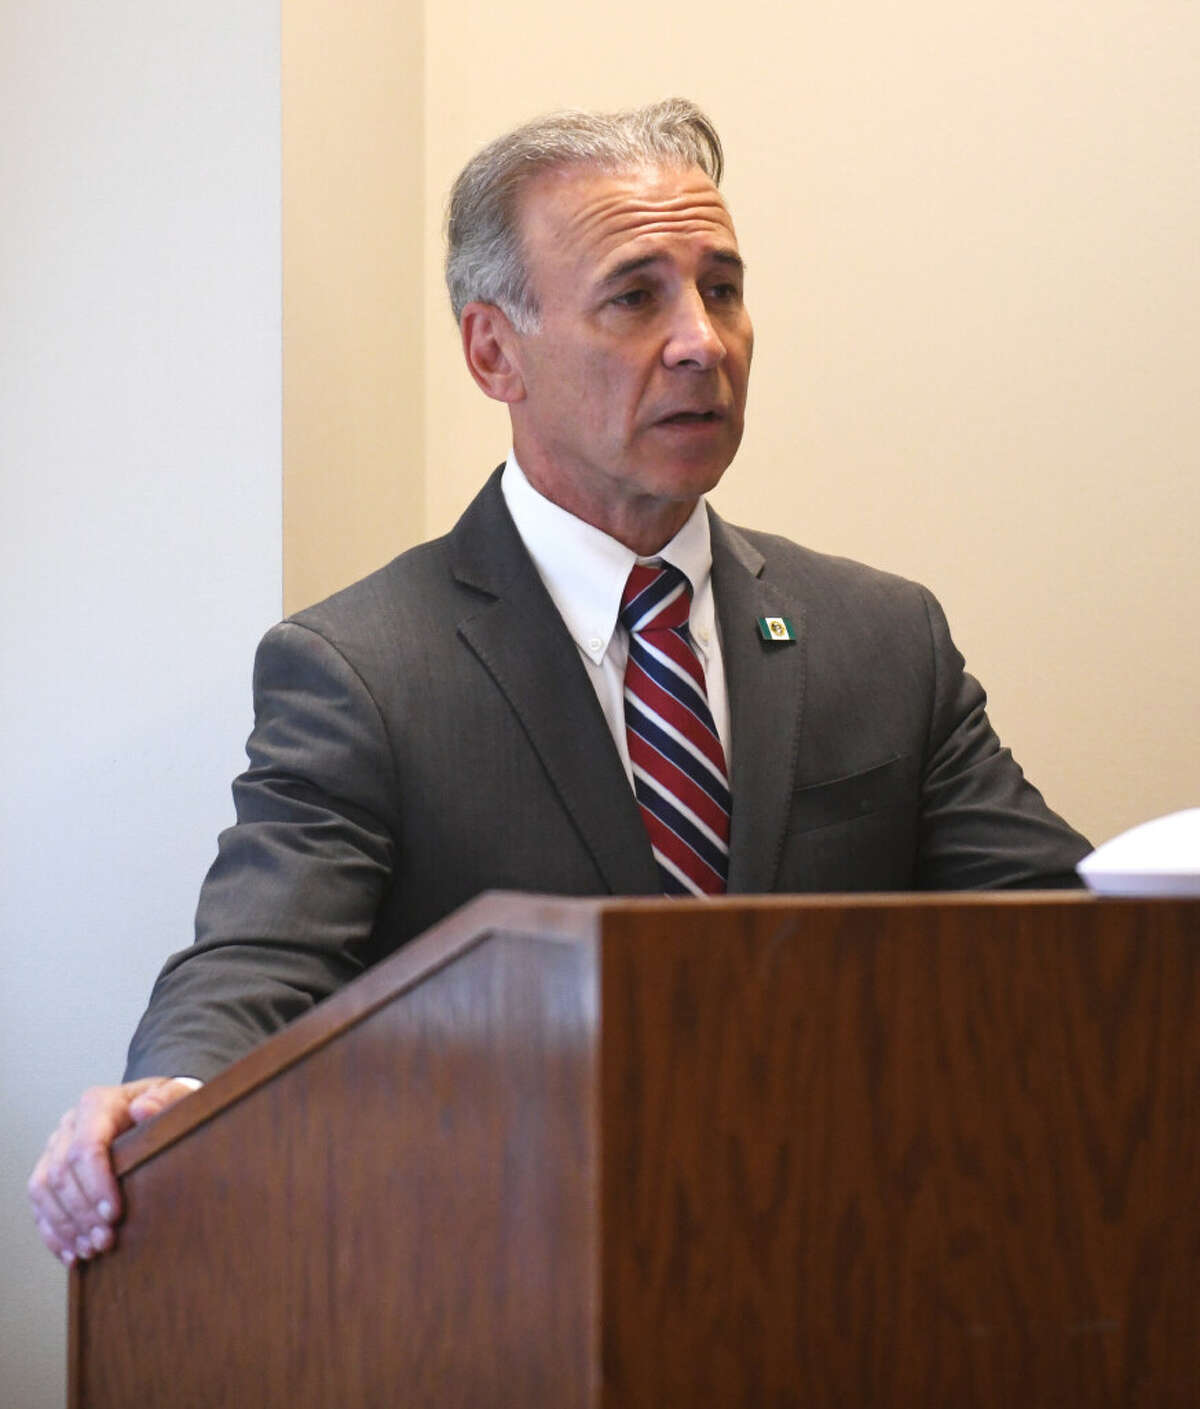 Greenwich First Selectman Fred Camillo has pushed for the independent investigation into the allegations of discriminatory hiring practices in the school district. The Board of Selectmen approved a waiver to hire the firm of Day Pitney, LLP